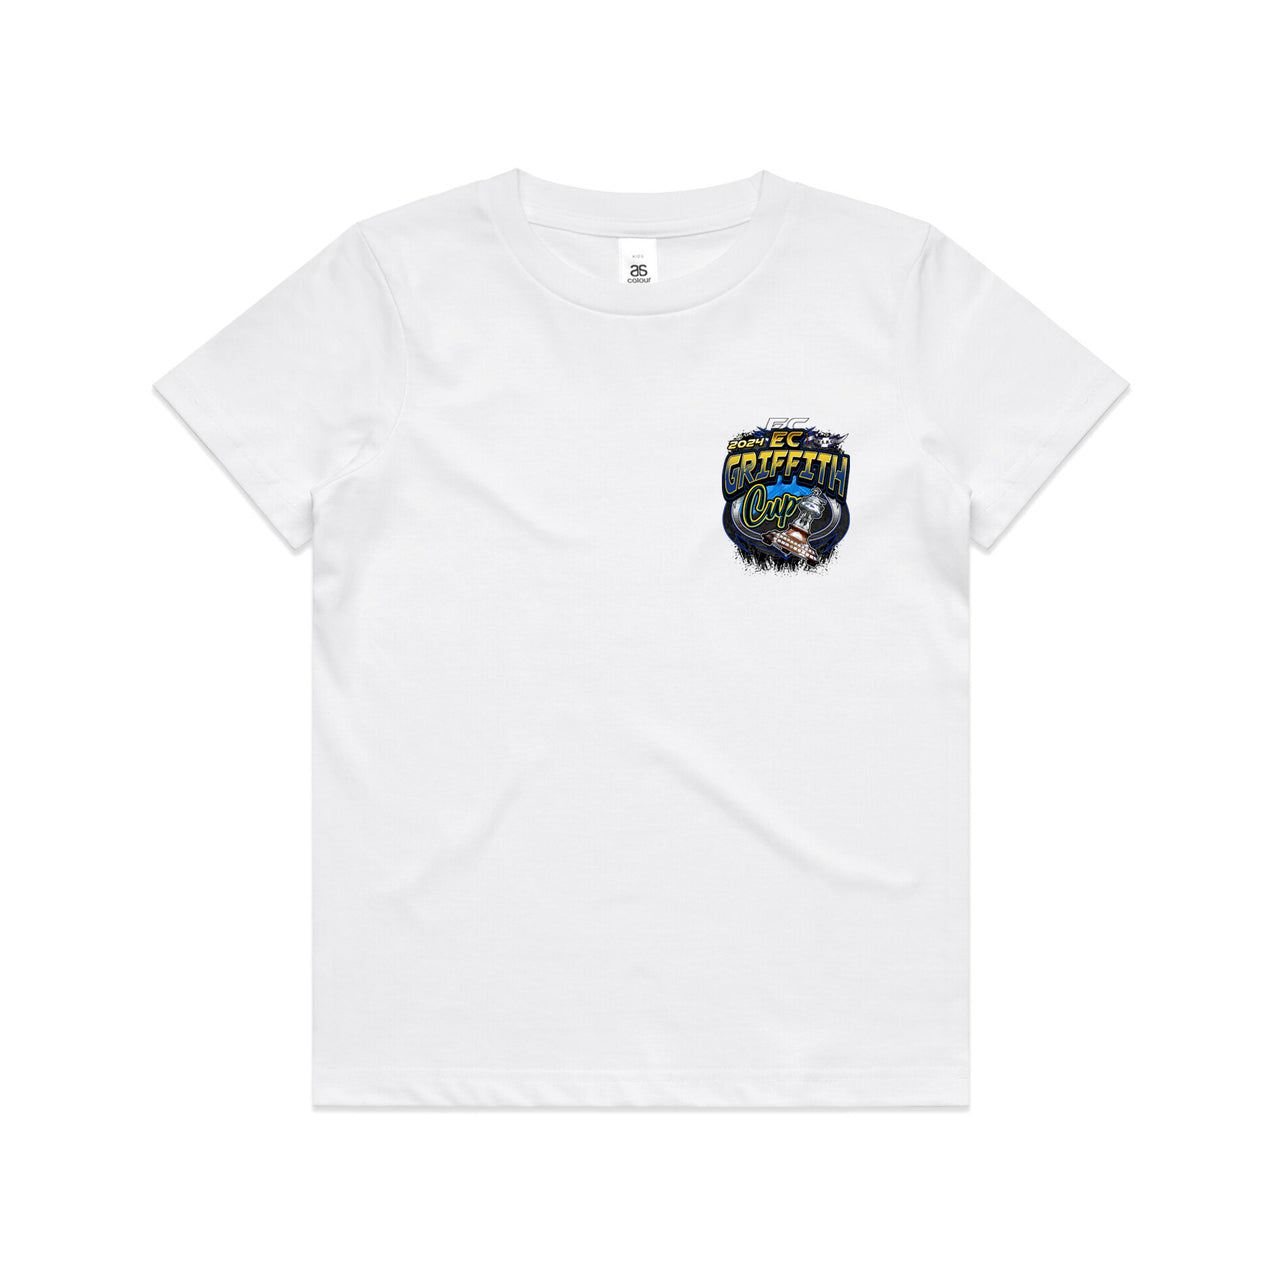 E.C Griffith Cup 2024 Event Youth/Kids Tee